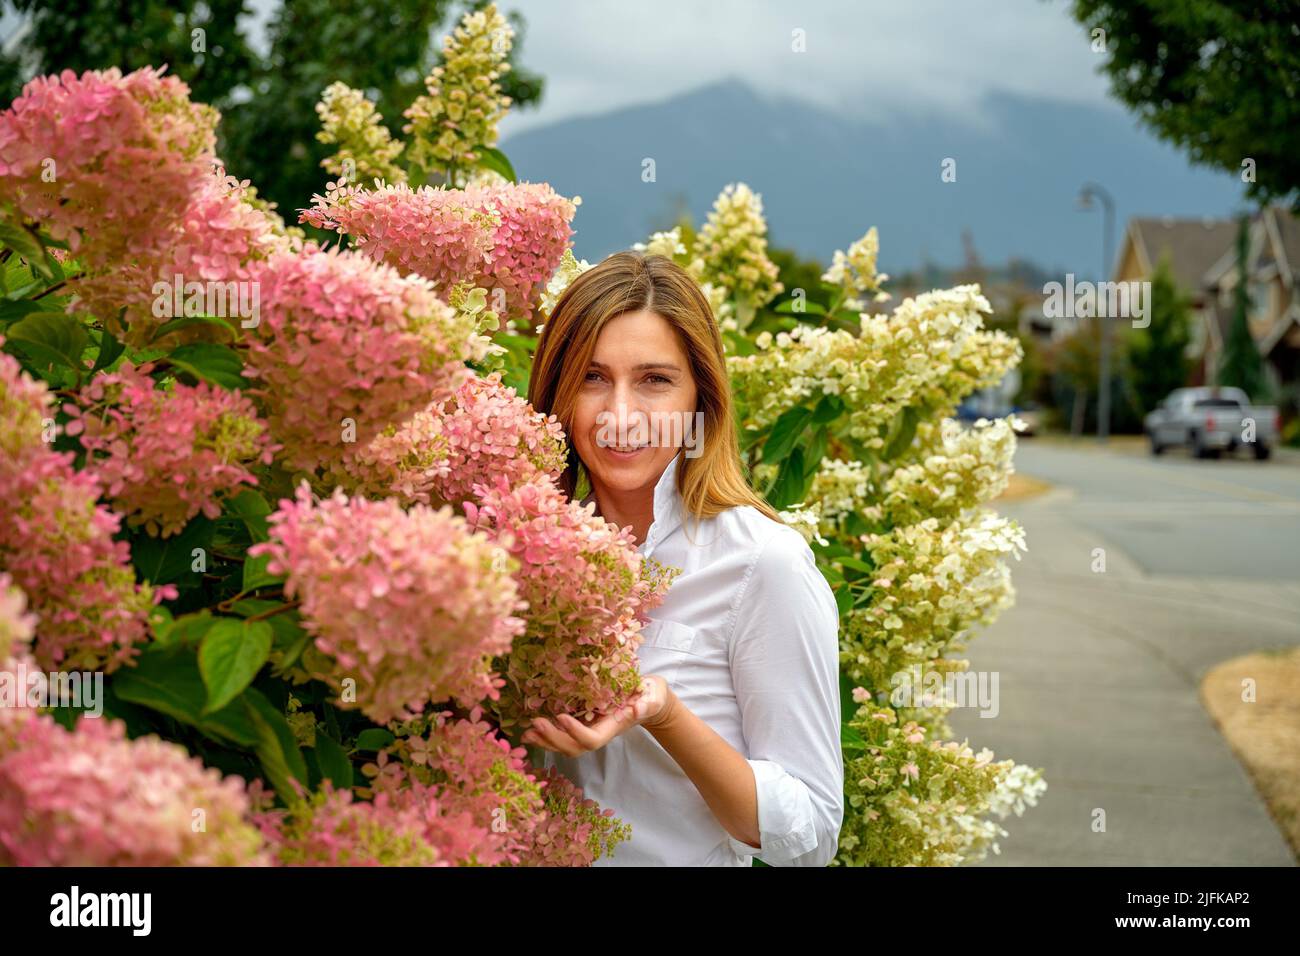 Happy attractive woman in her late 40s enjoying her beautiful flower garden and contentedly looking at her blooming hortensia and hibiscus flowers in Stock Photo